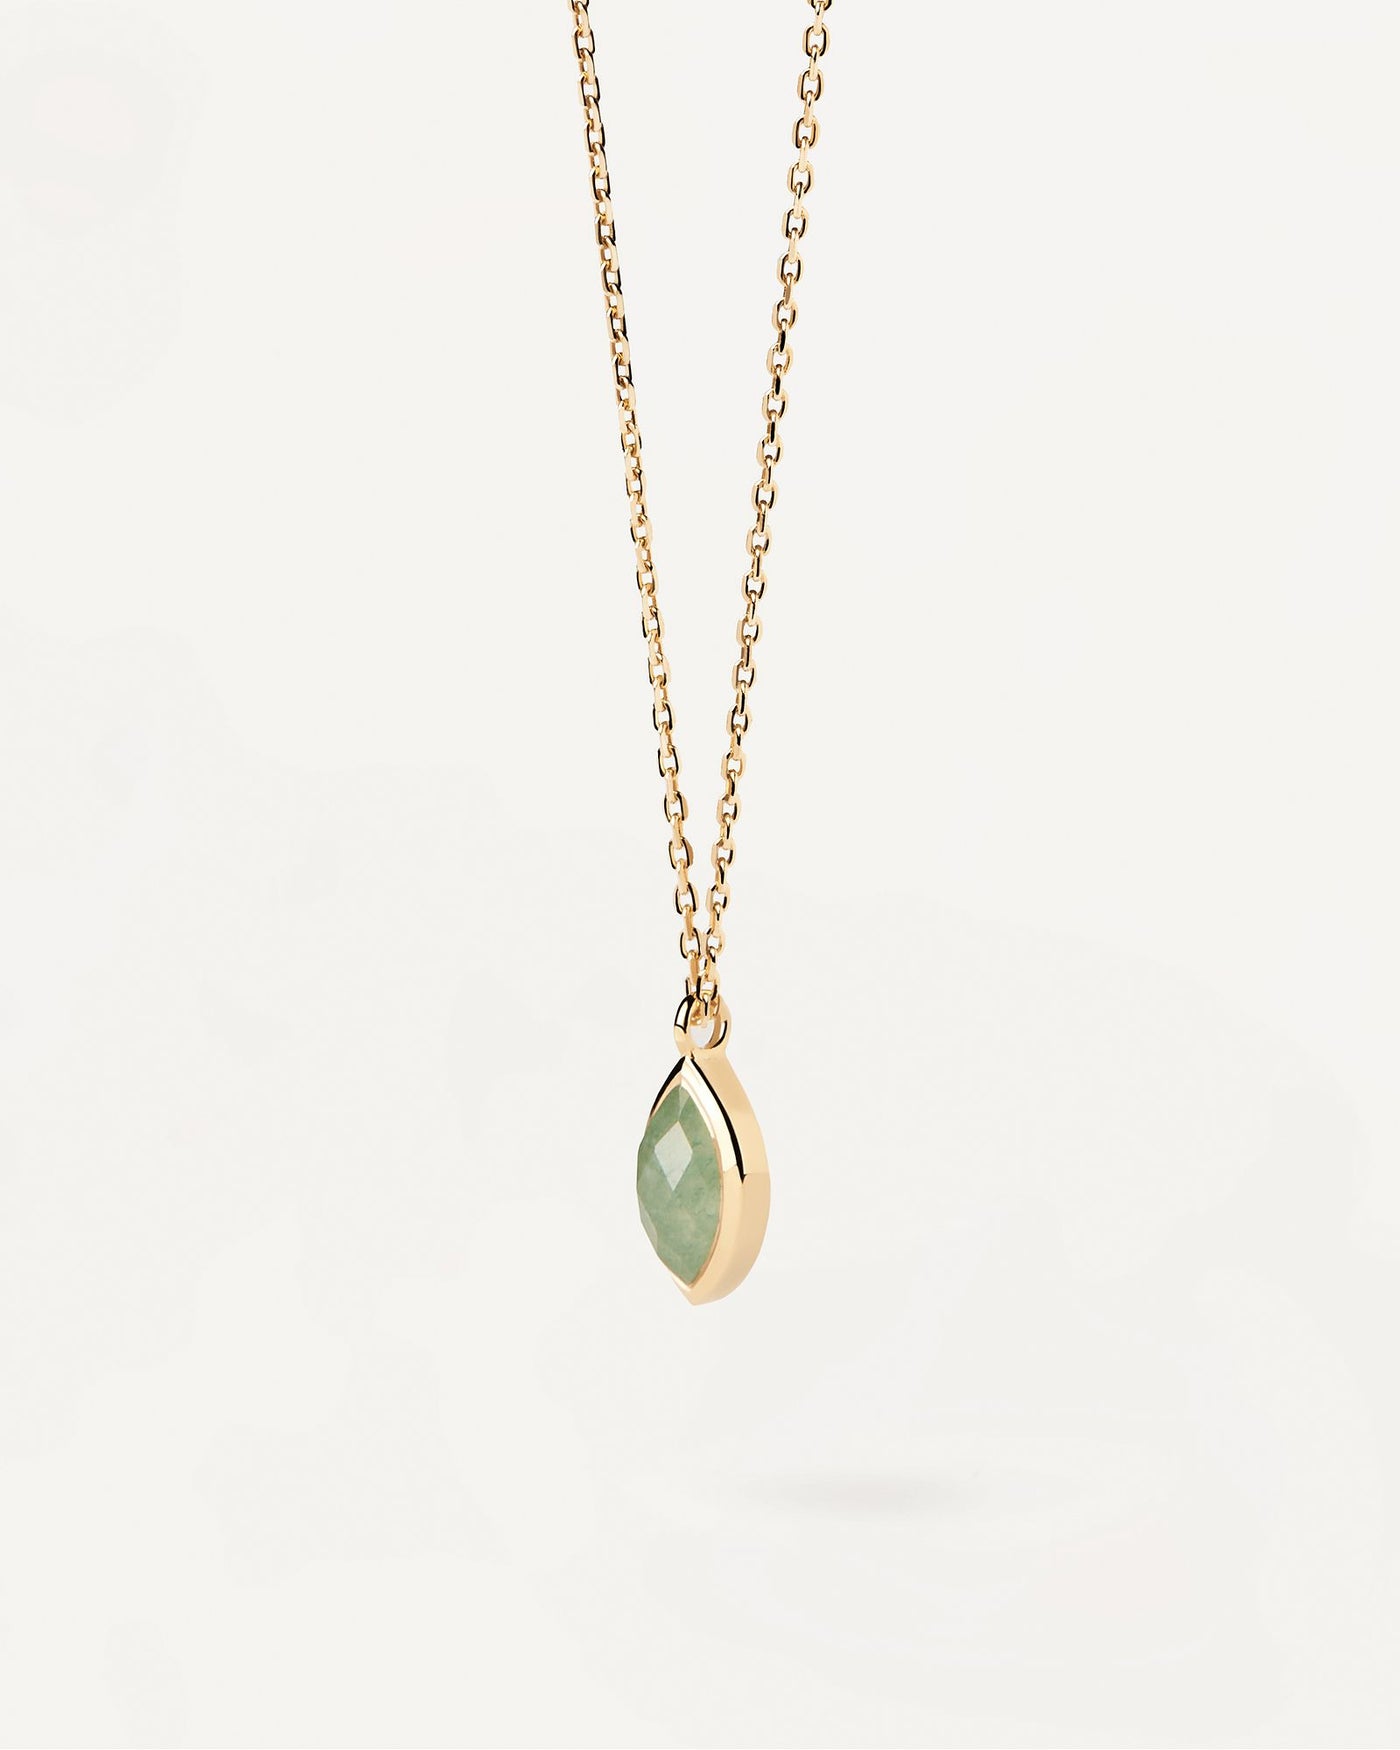 2024 Selection |  Green Aventurine Nomad Necklace. Gold-plated chain necklace with marquise cut green gemstone pendant. Get the latest arrival from PDPAOLA. Place your order safely and get this Best Seller. Free Shipping.